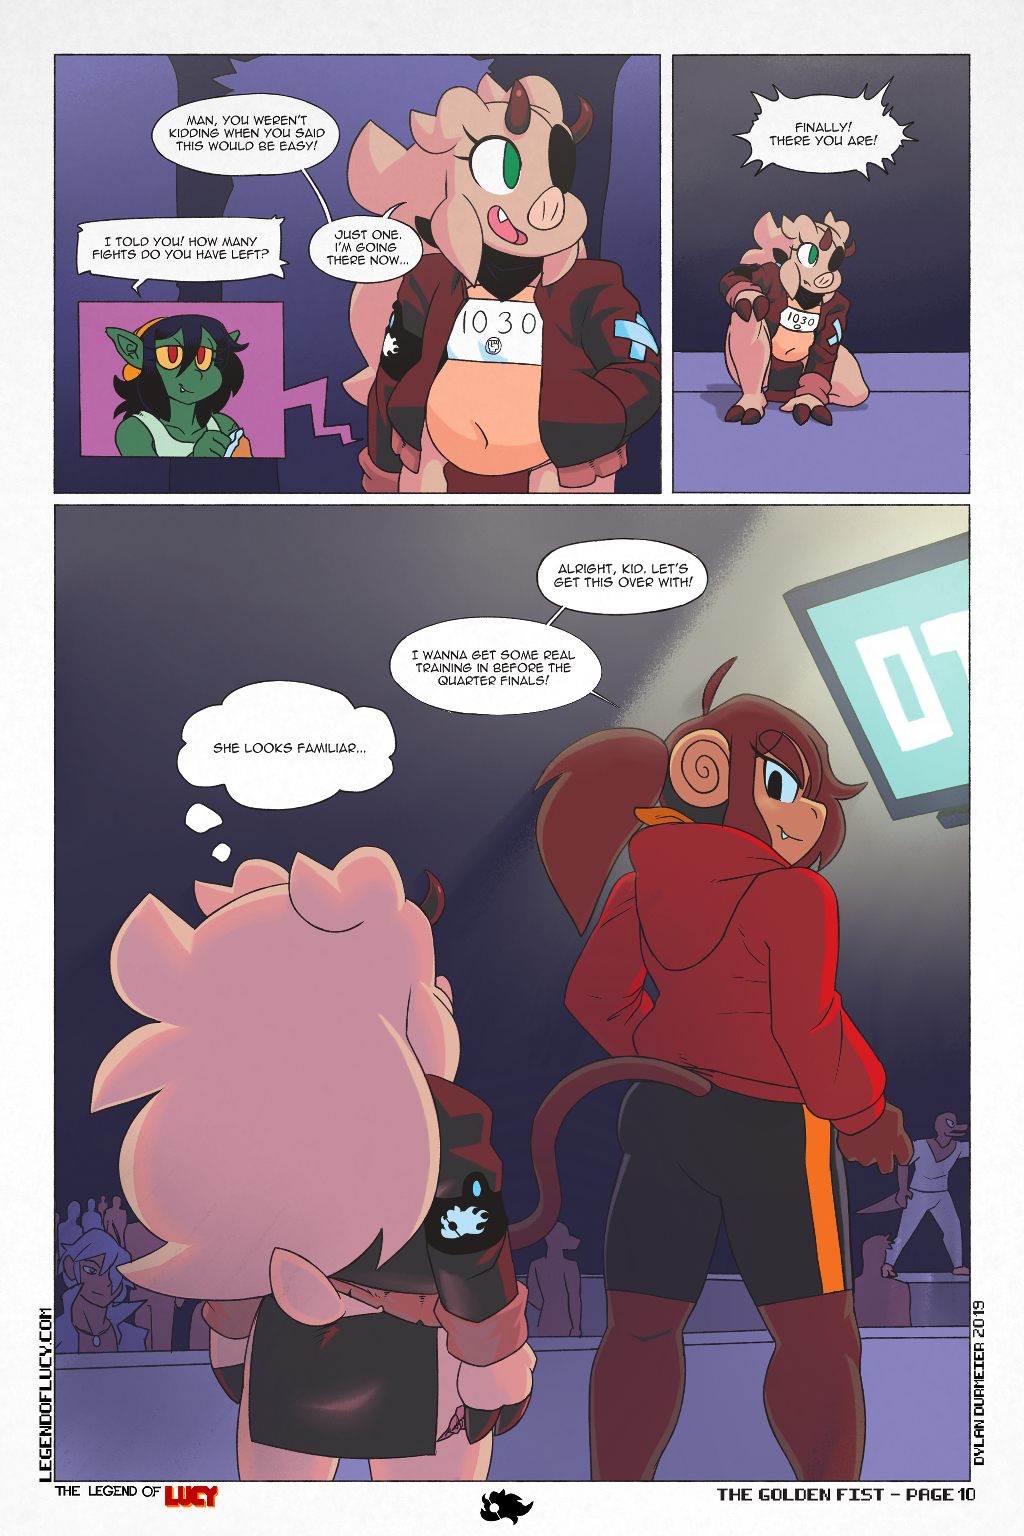 The Golden Fist Page 10